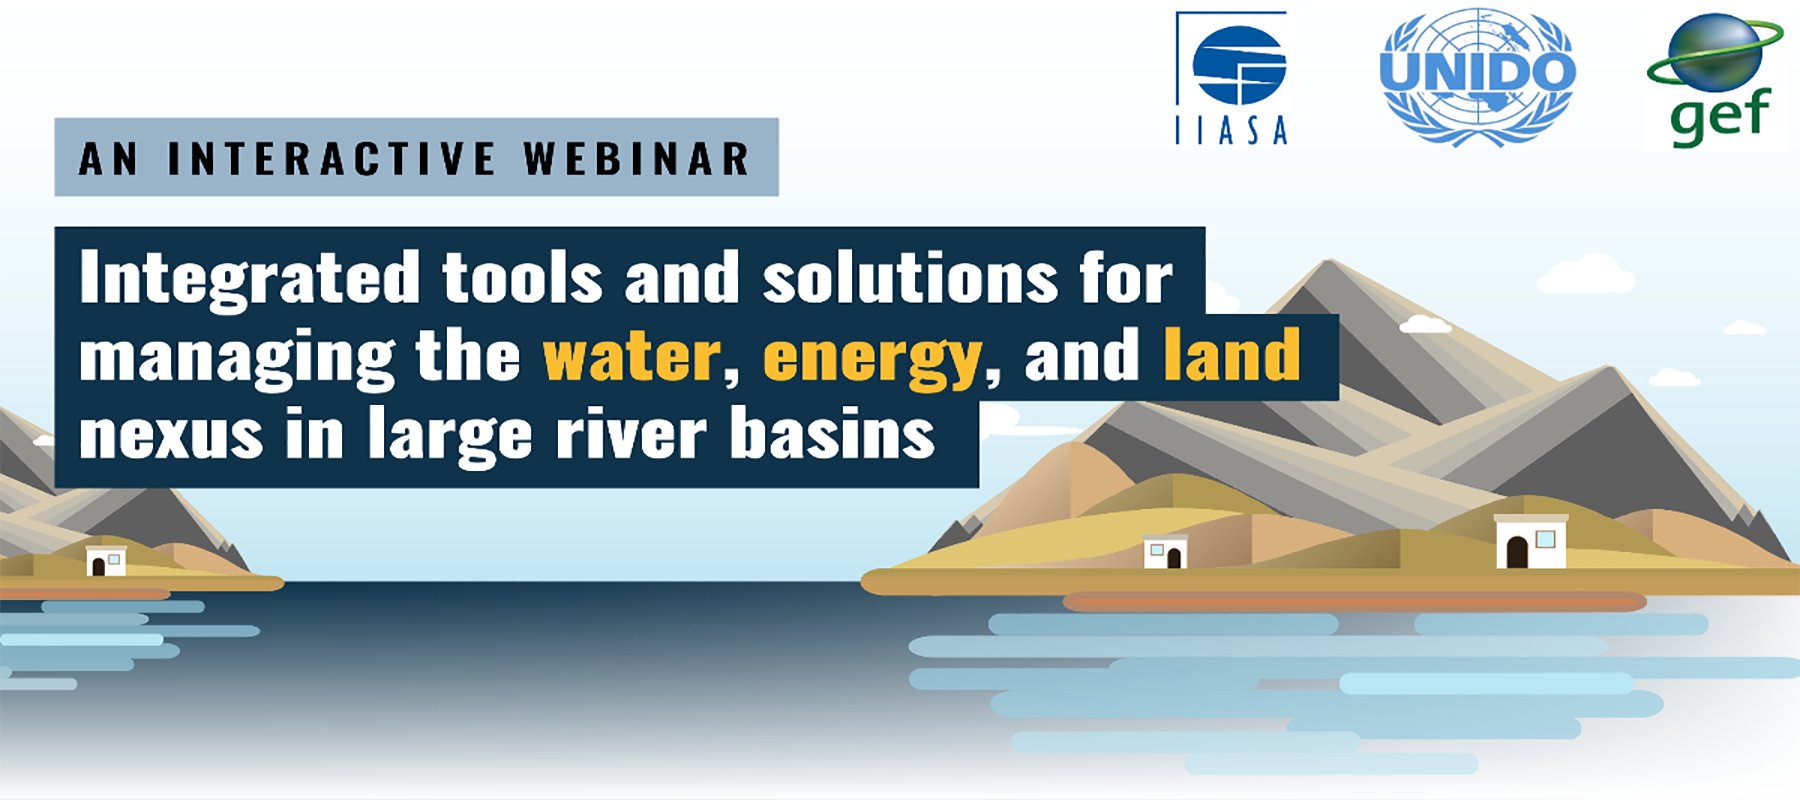 Webinar: Integrated tools for managing the water, energy, and land nexus in large river basins